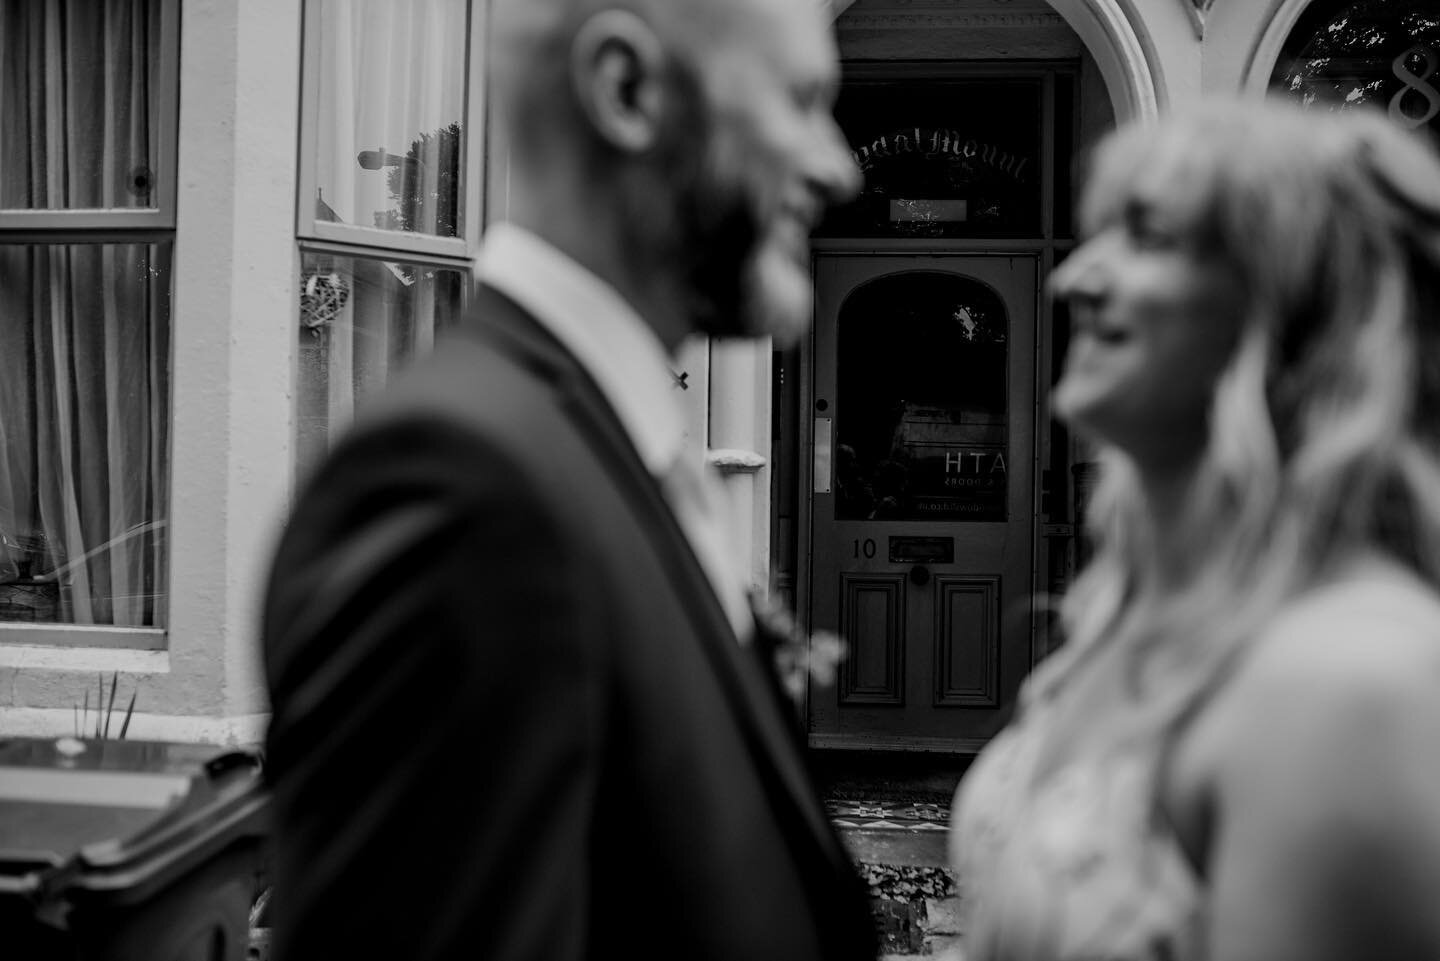 J+T ❤️

So much fun photographing these two getting hitched a few weeks ago. 

Photographed in front of their first flat together ✨

#microwedding #marrynowpartylater #southwaleswedding #citywedding #ukweddingphotographer #chasinglight #makeportraits